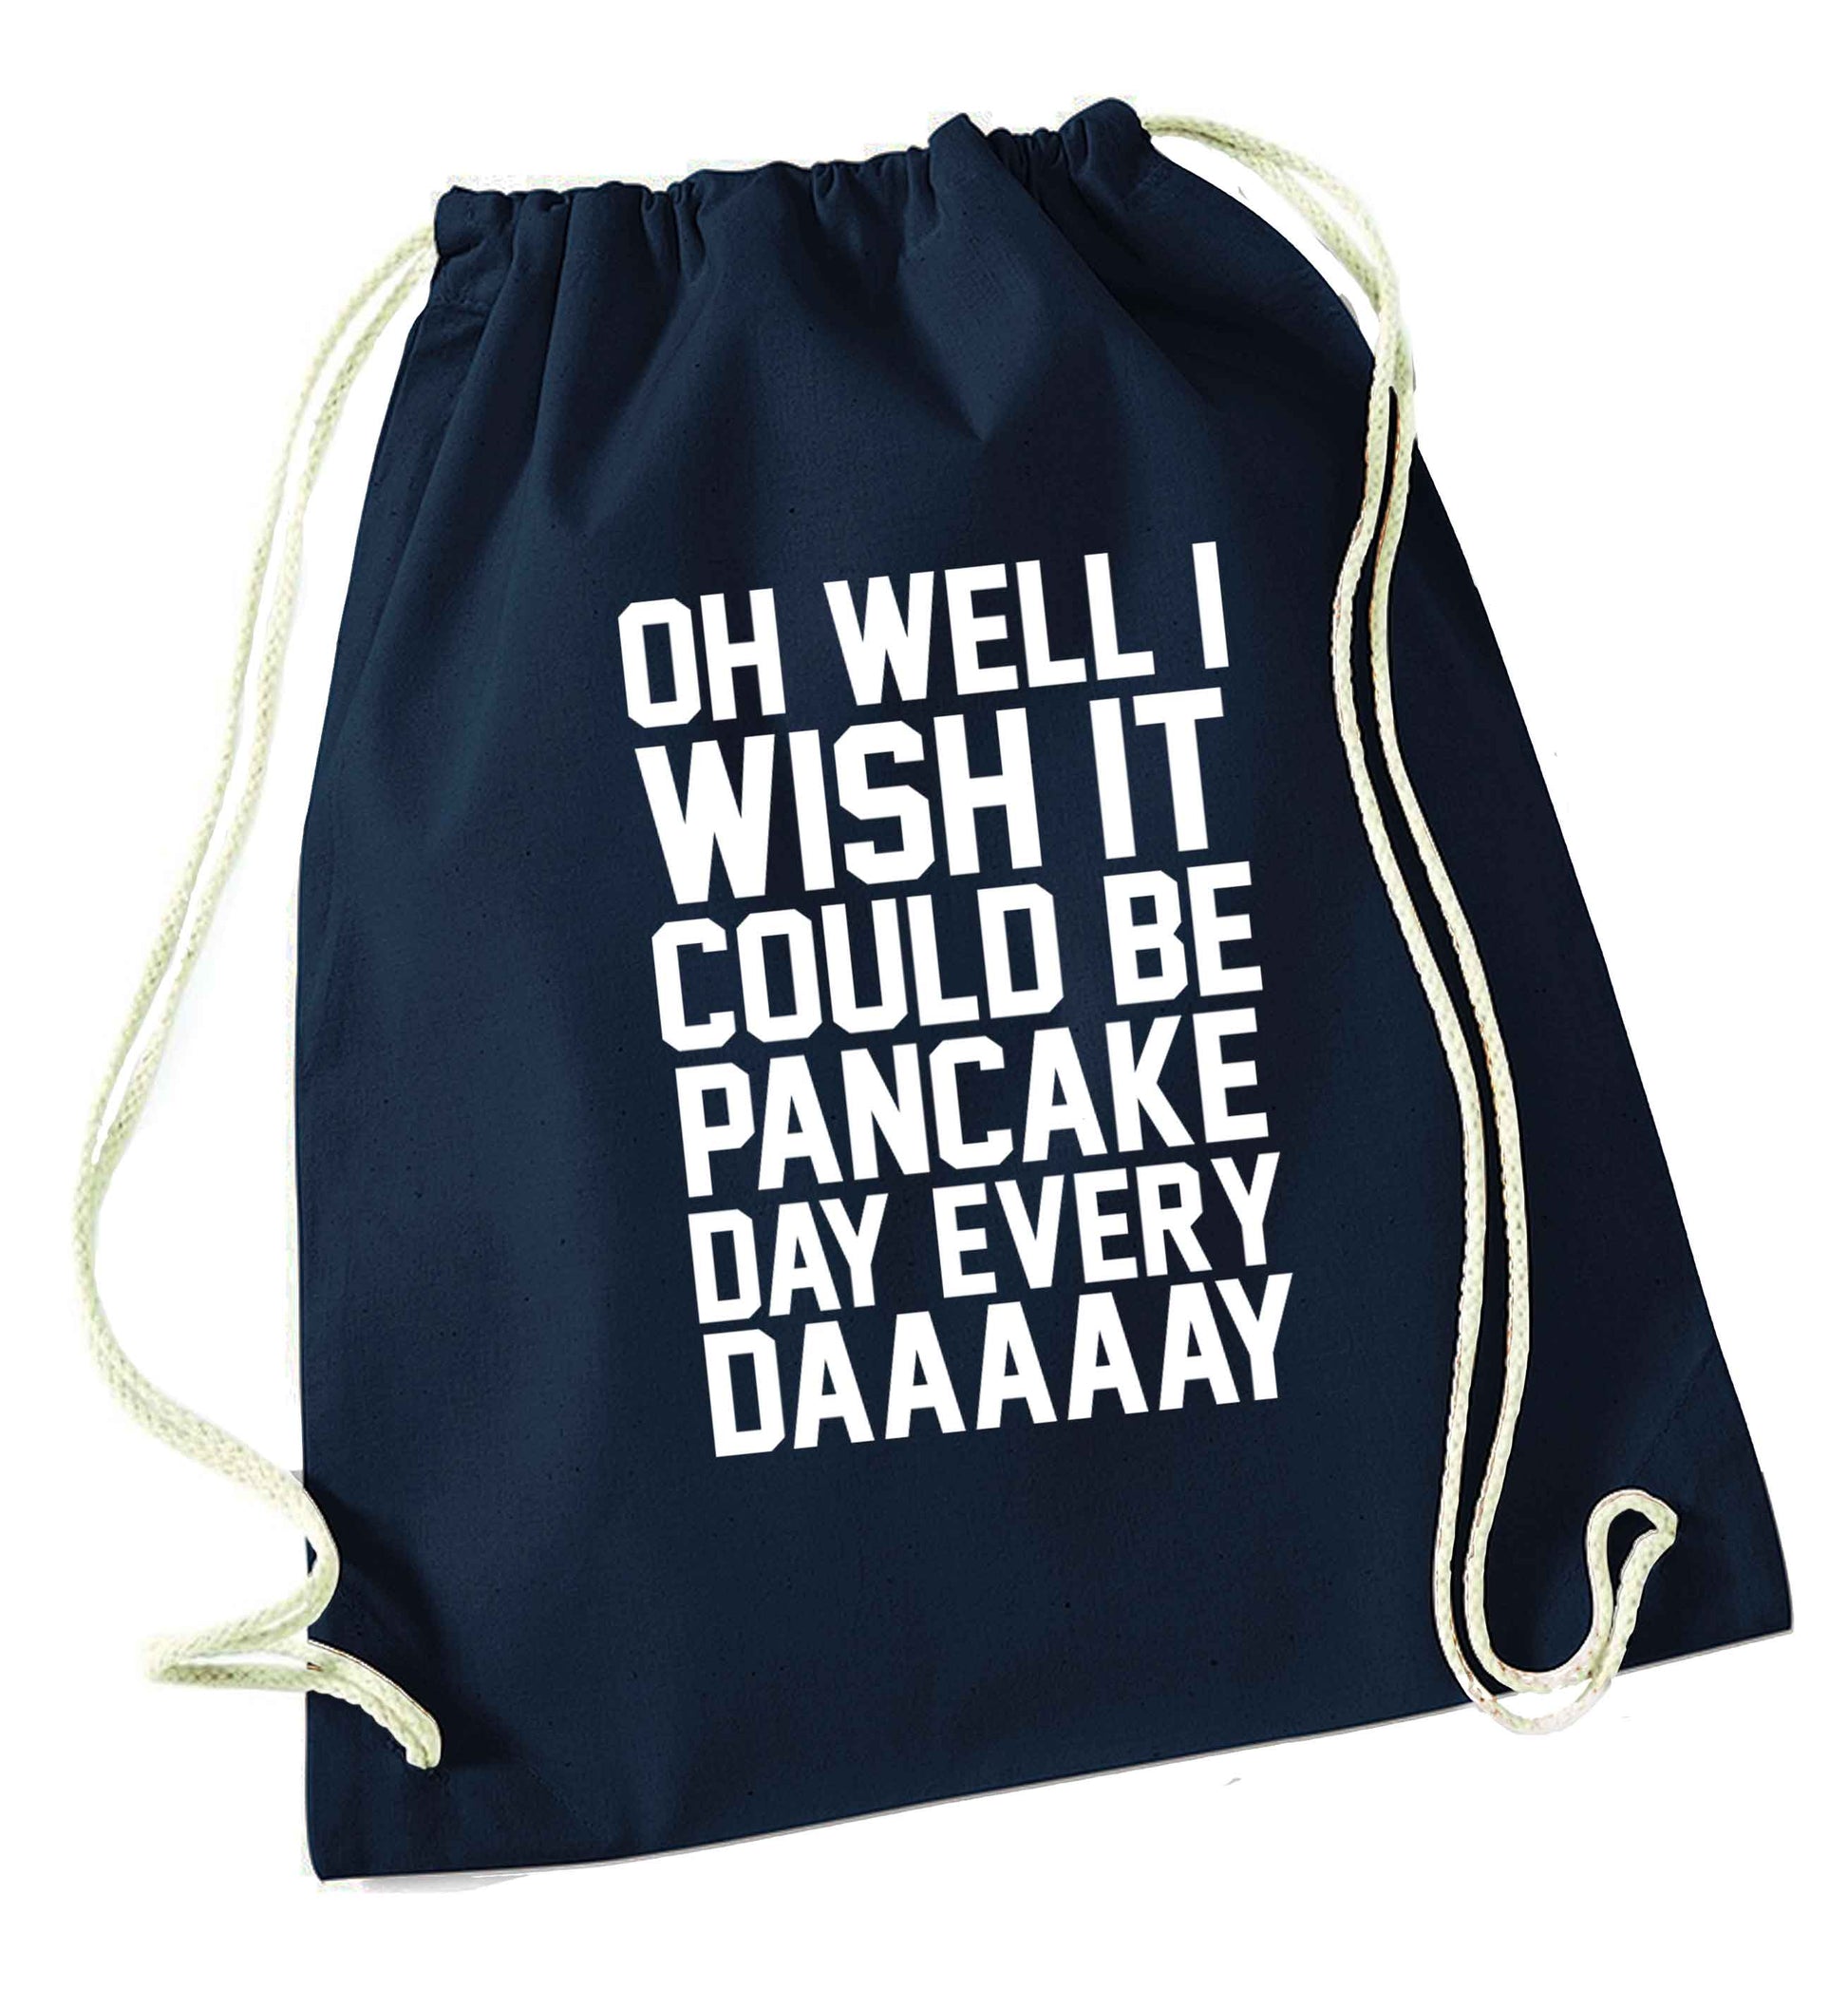 Oh well I wish it could be pancake day every day navy drawstring bag